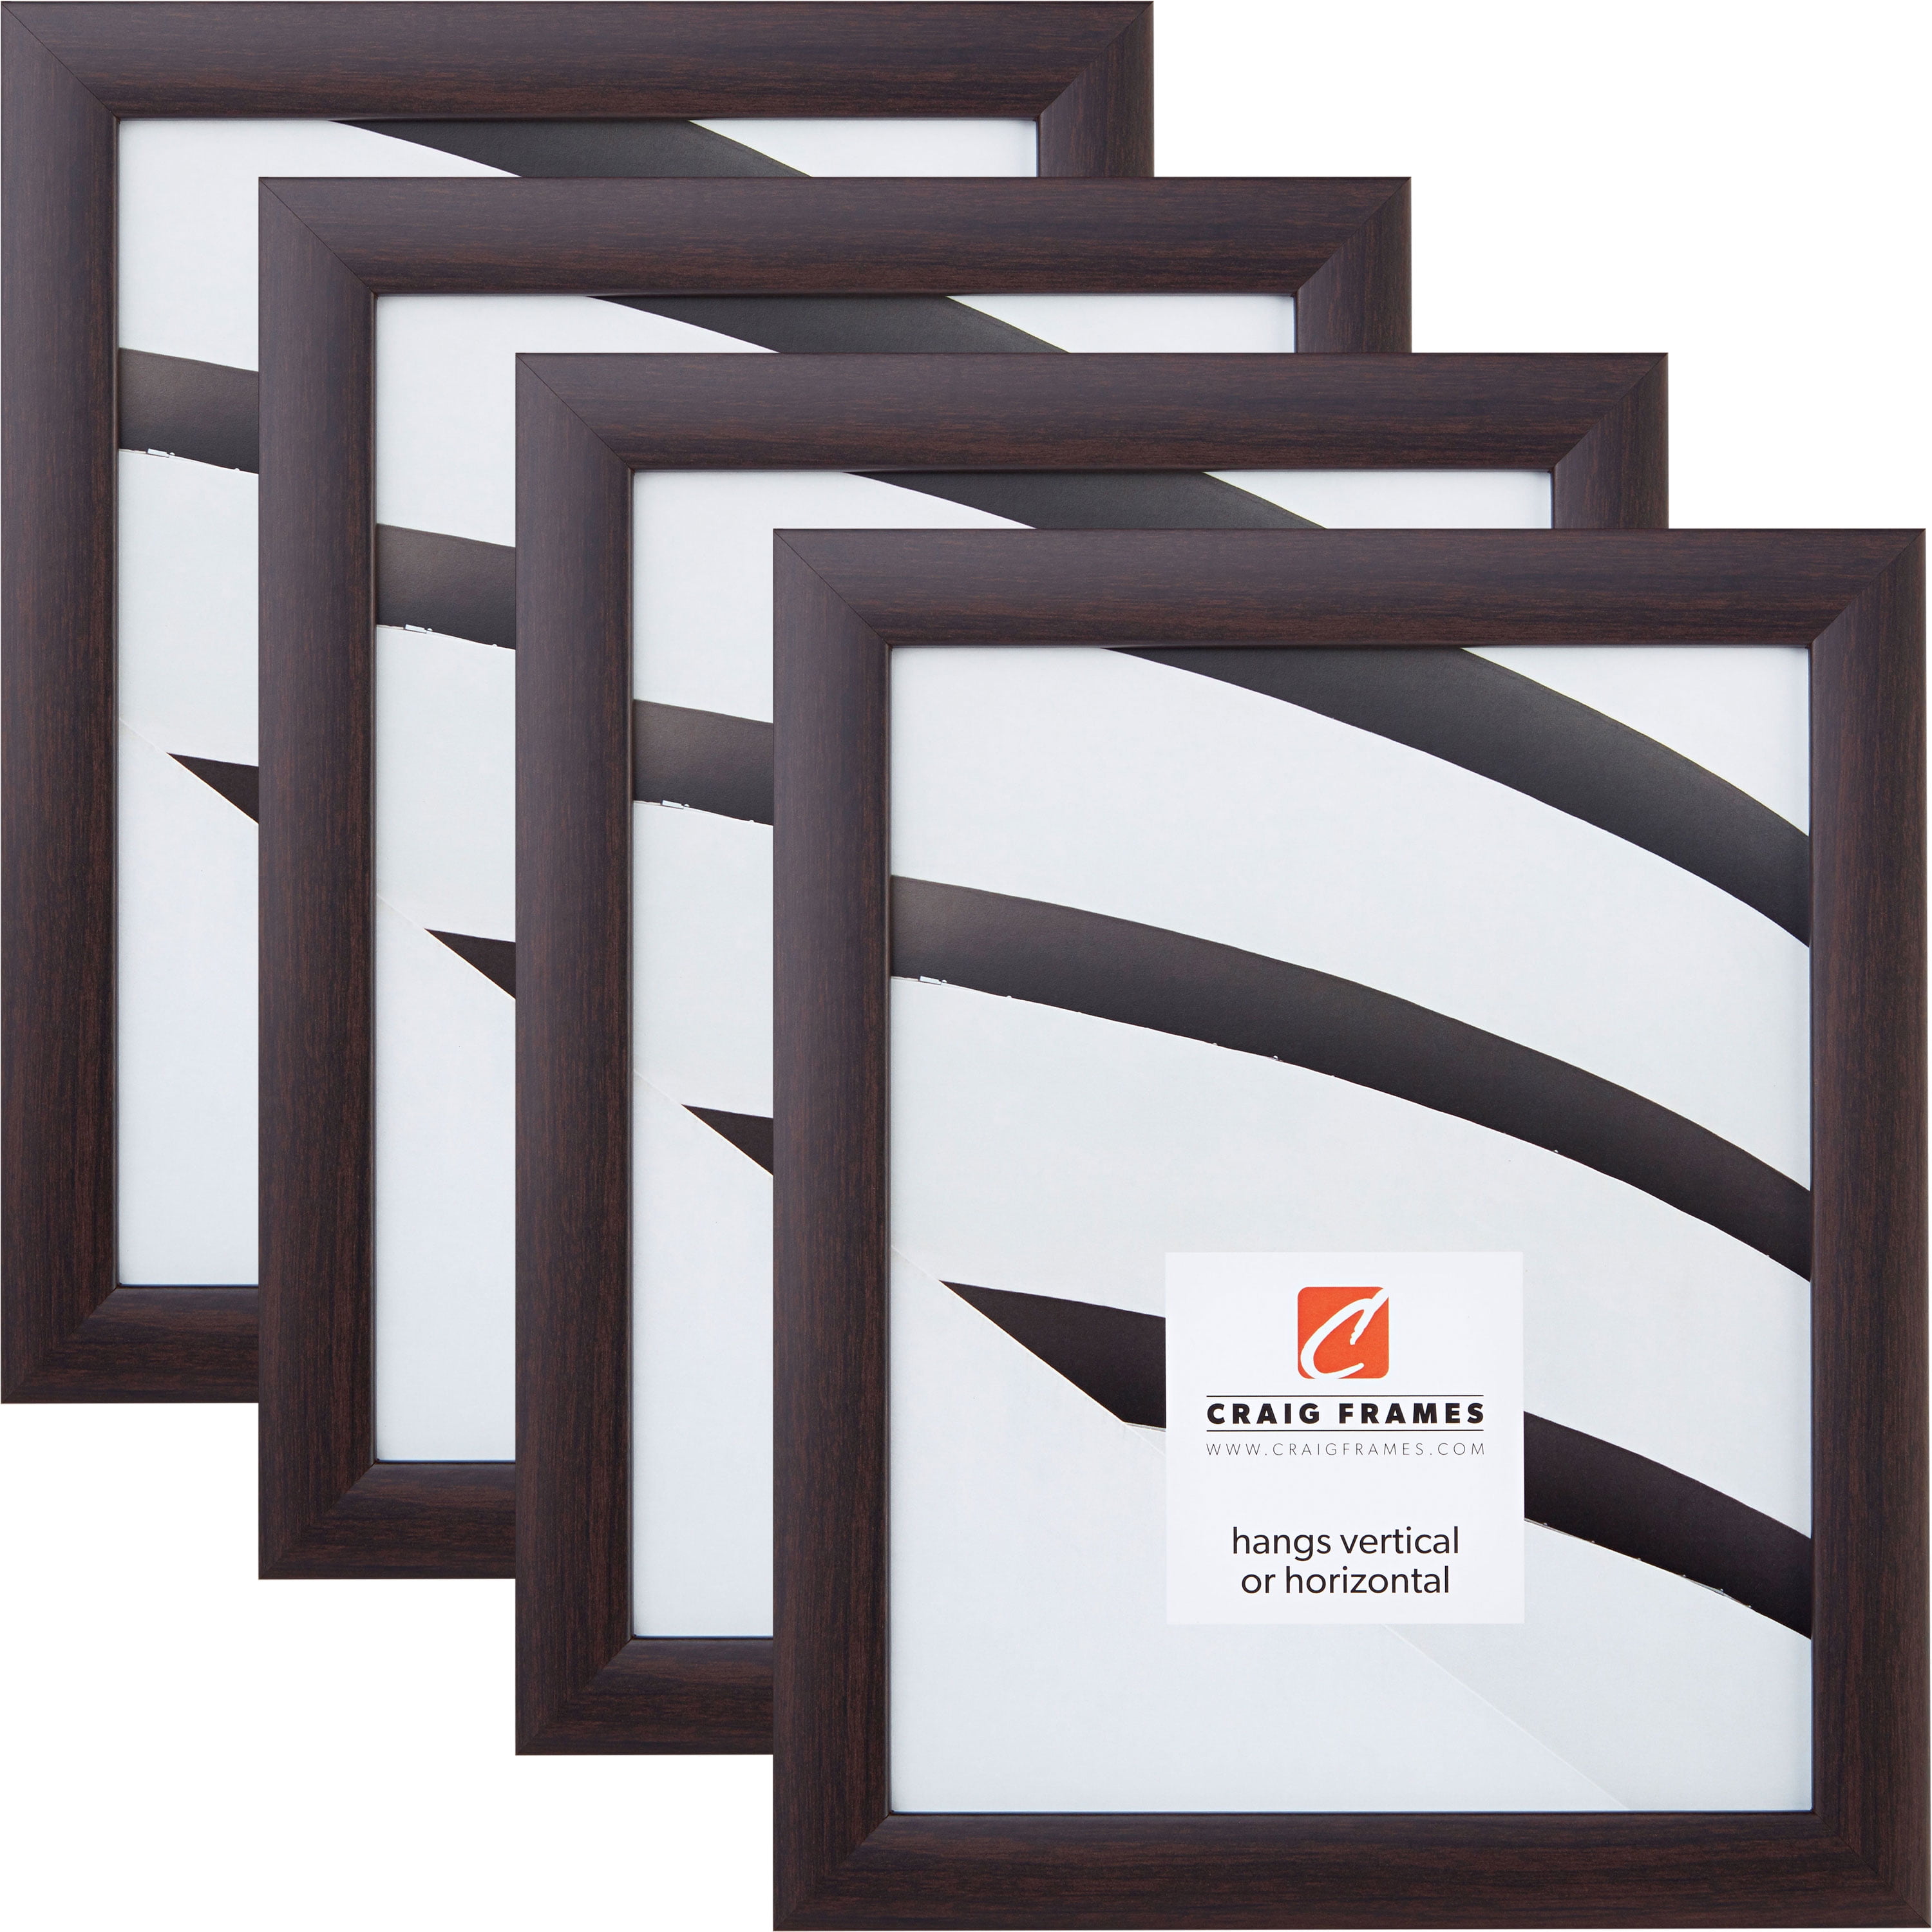 23247018 12x36 Brushed Silver Picture Frame Matted to Display 8x32 Photo 